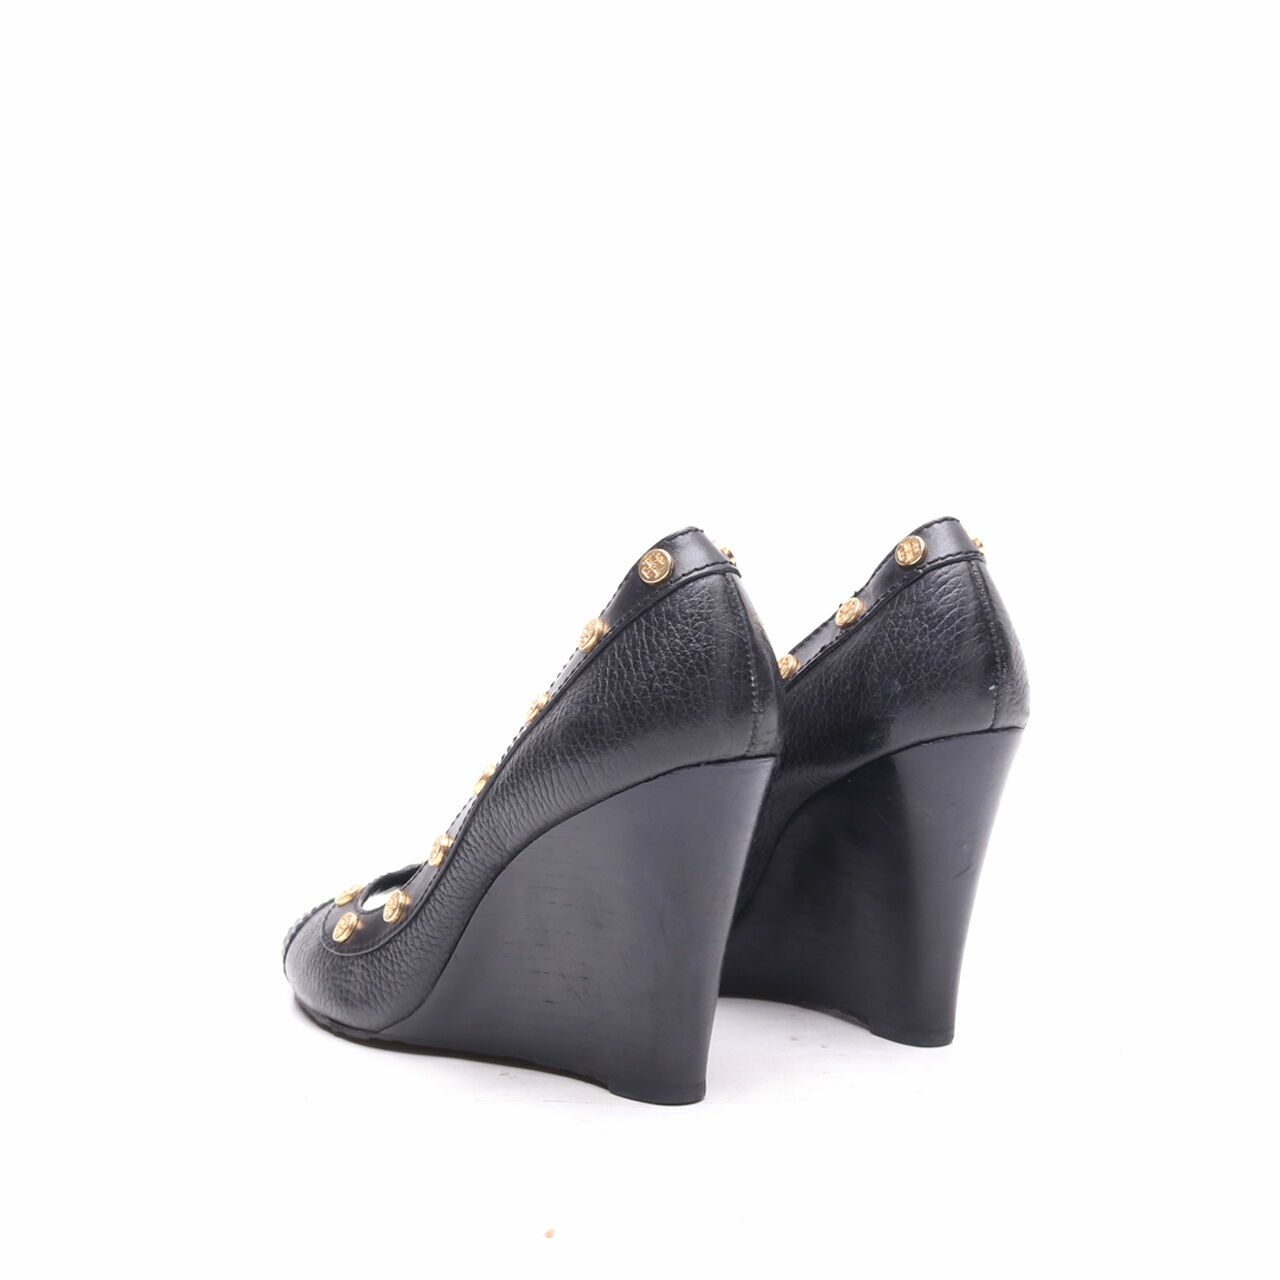 Tory Burch Nelson Studded Open toe Black Wedges